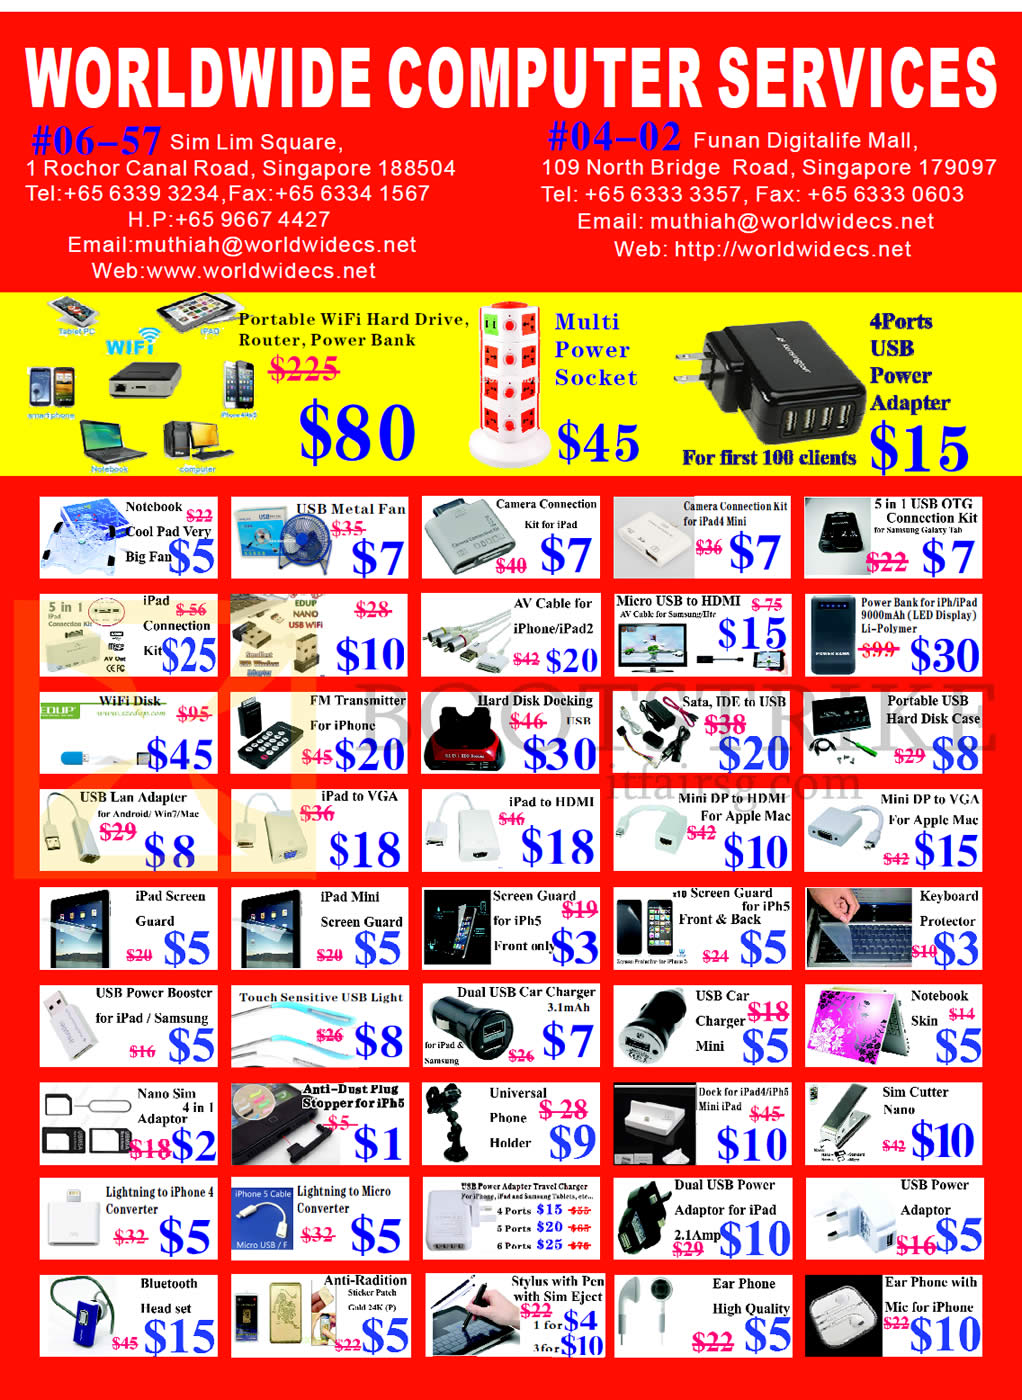 COMEX 2014 price list image brochure of Worldwide Computer Services Accessories Adapters, Wifi Disk, Notebook Cooler, Cables, Mini DP, Dock, Sim Cutter, USB Power Adaptor, Bluetooth Headset, Earphone